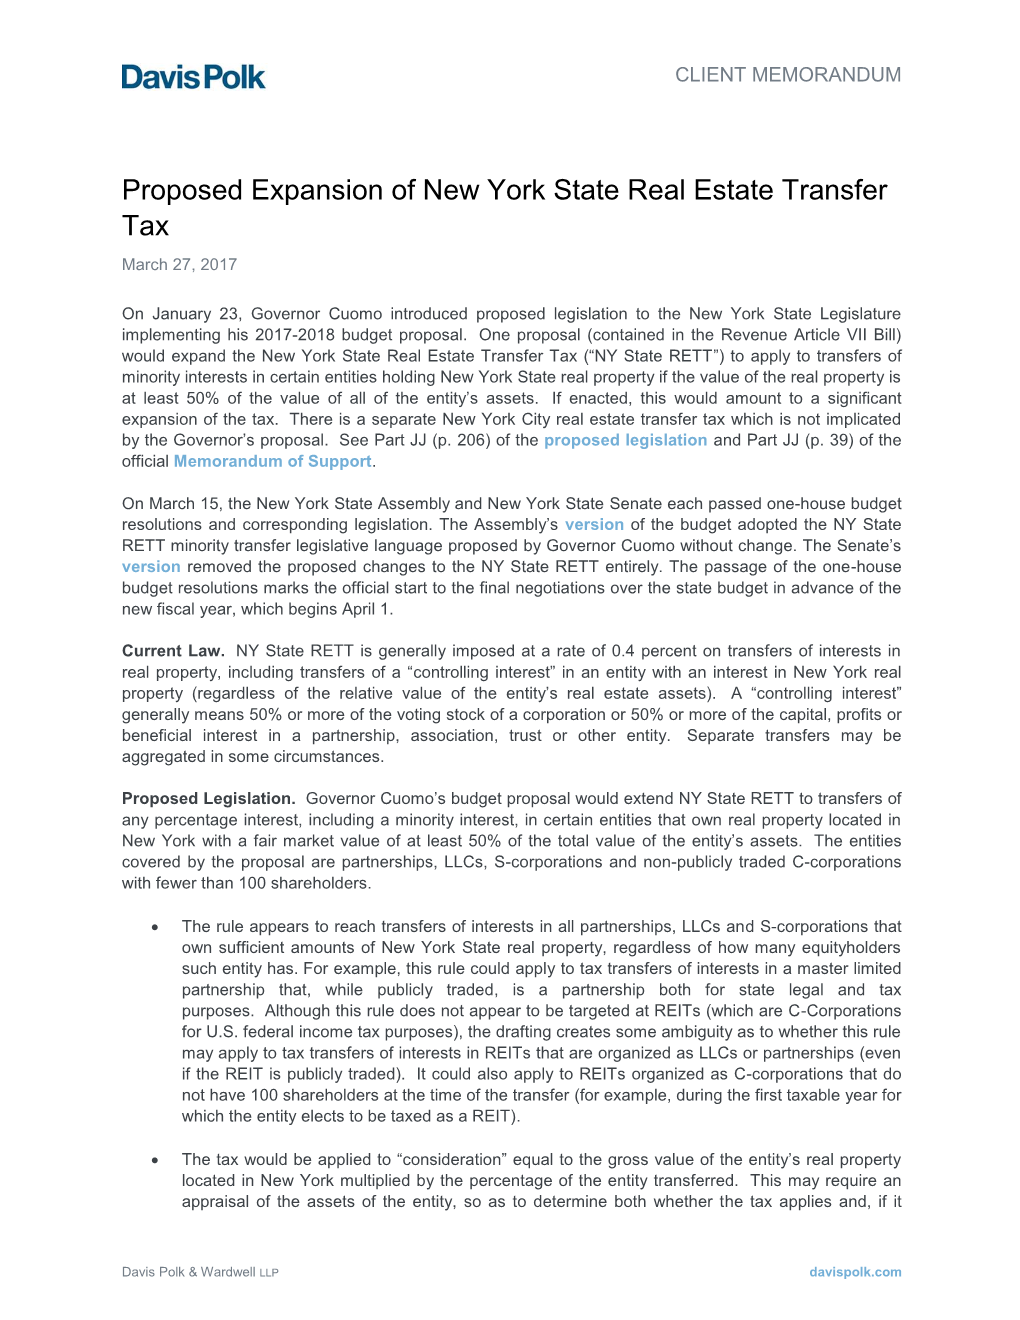 Proposed Expansion of New York State Real Estate Transfer Tax March 27, 2017